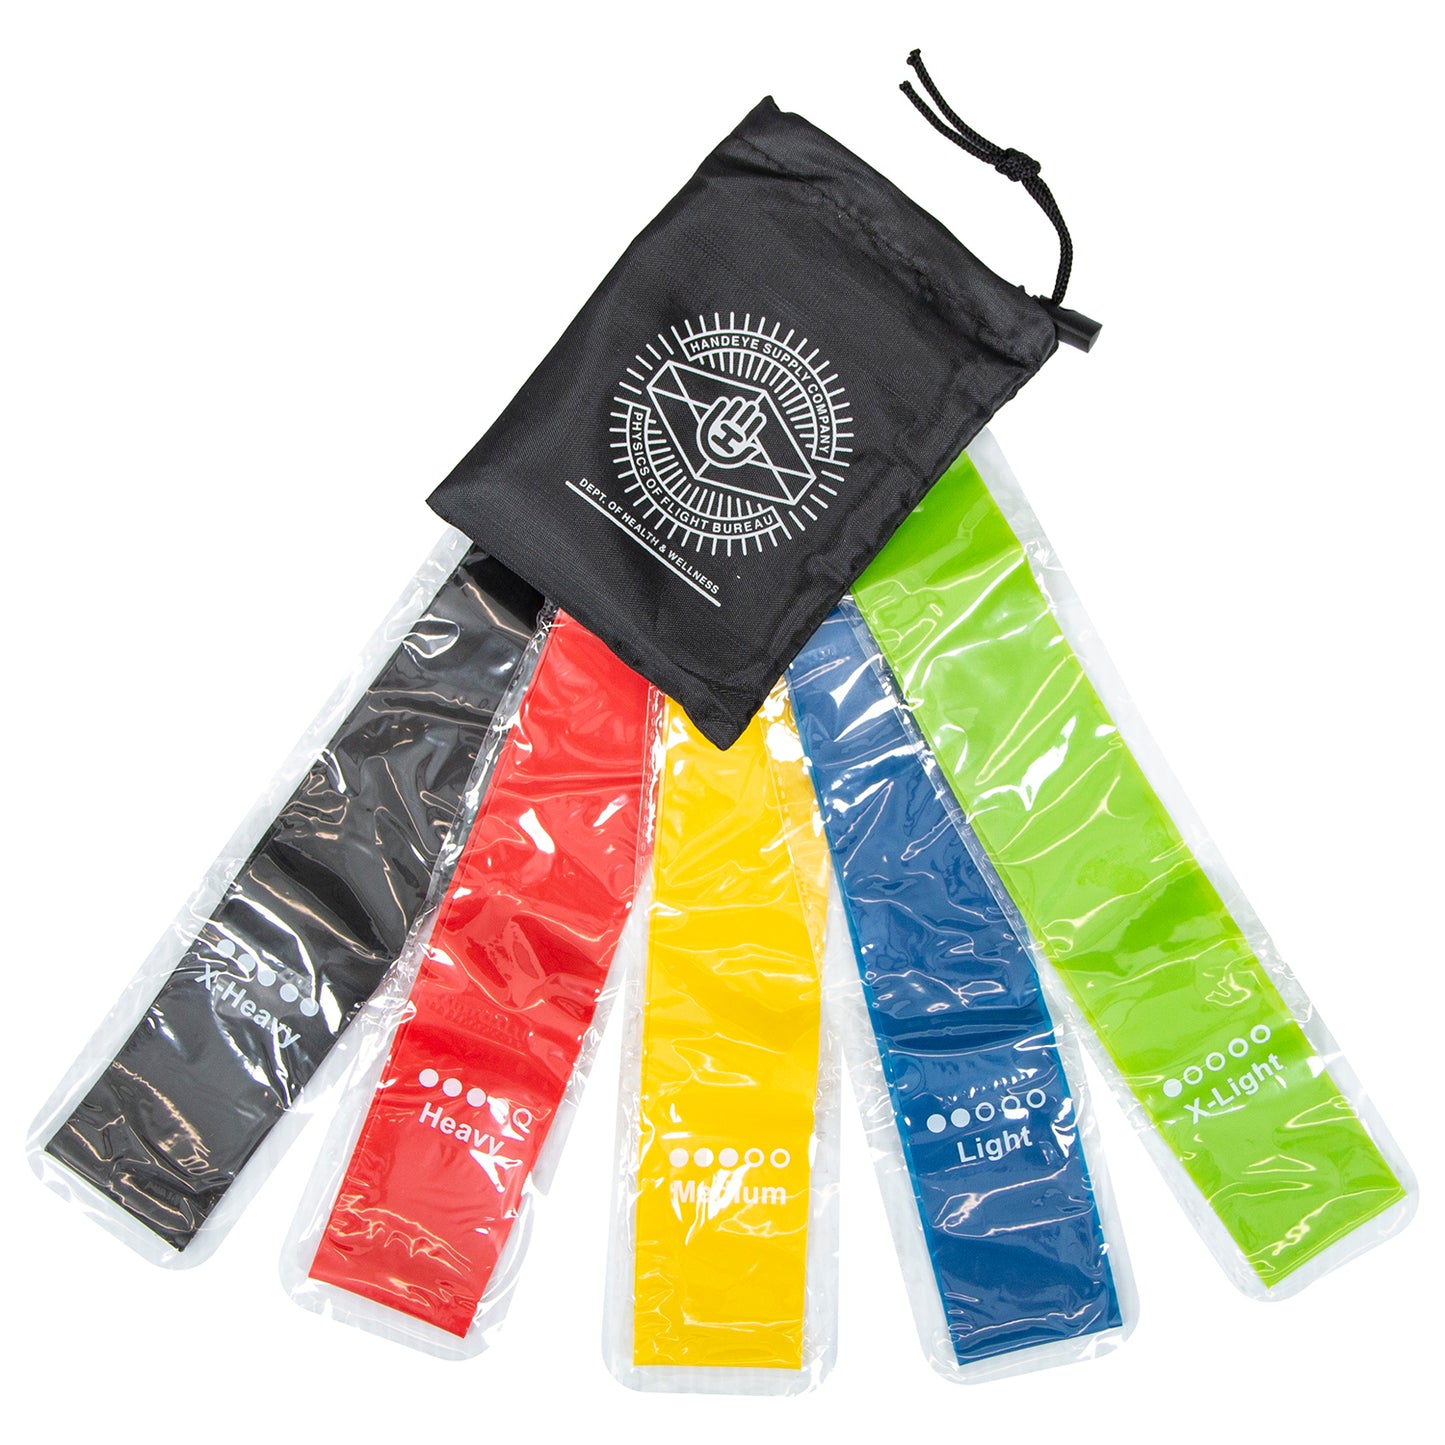 HSCo Favorite Bands Stretch Band Set w/ Pouch